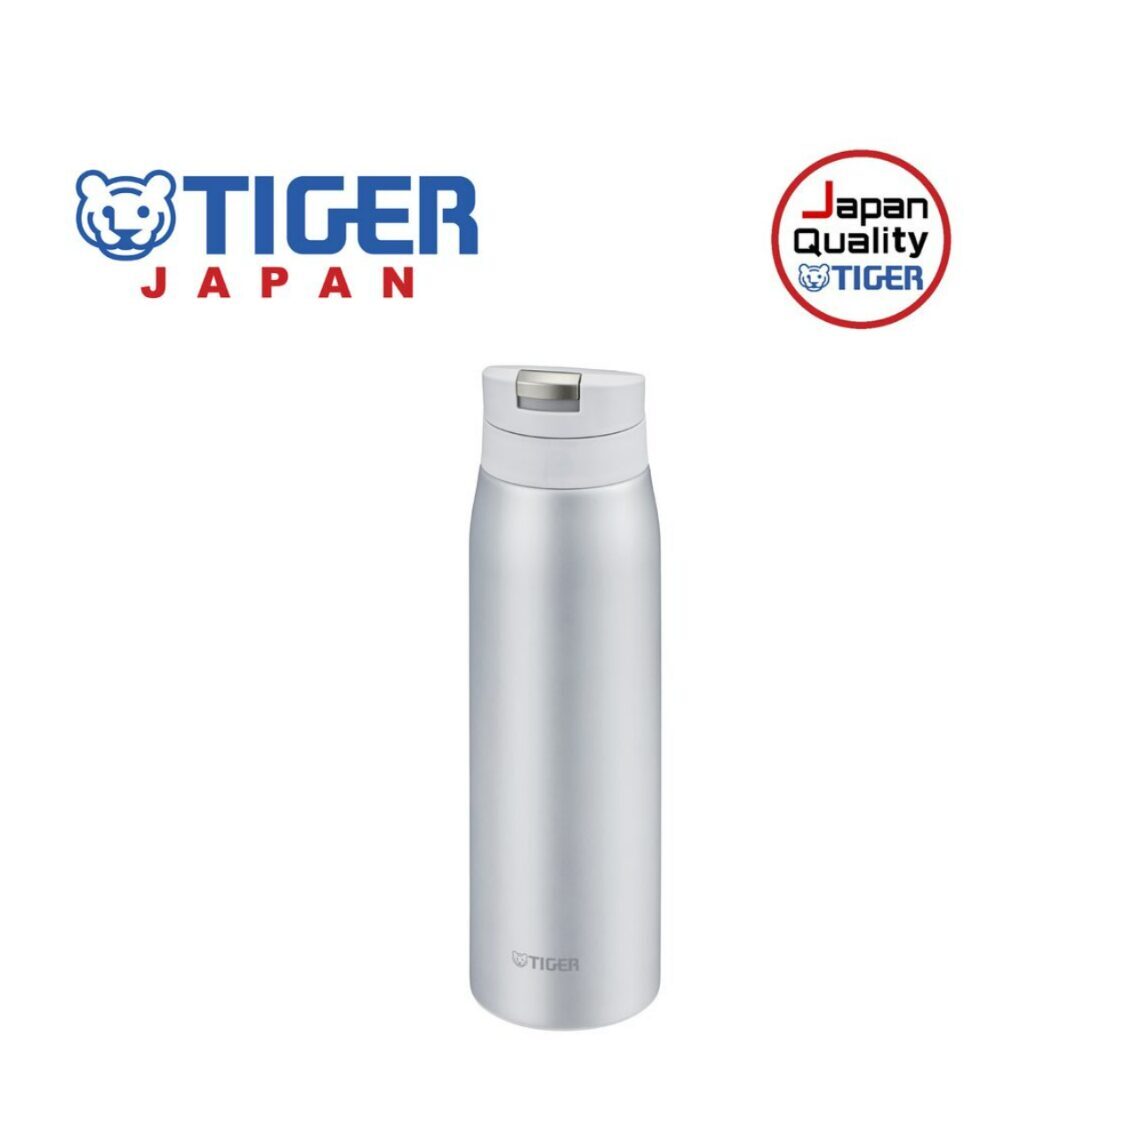 Tiger 600ml Double Stainless Steel Mug Black MCX-A601-ST